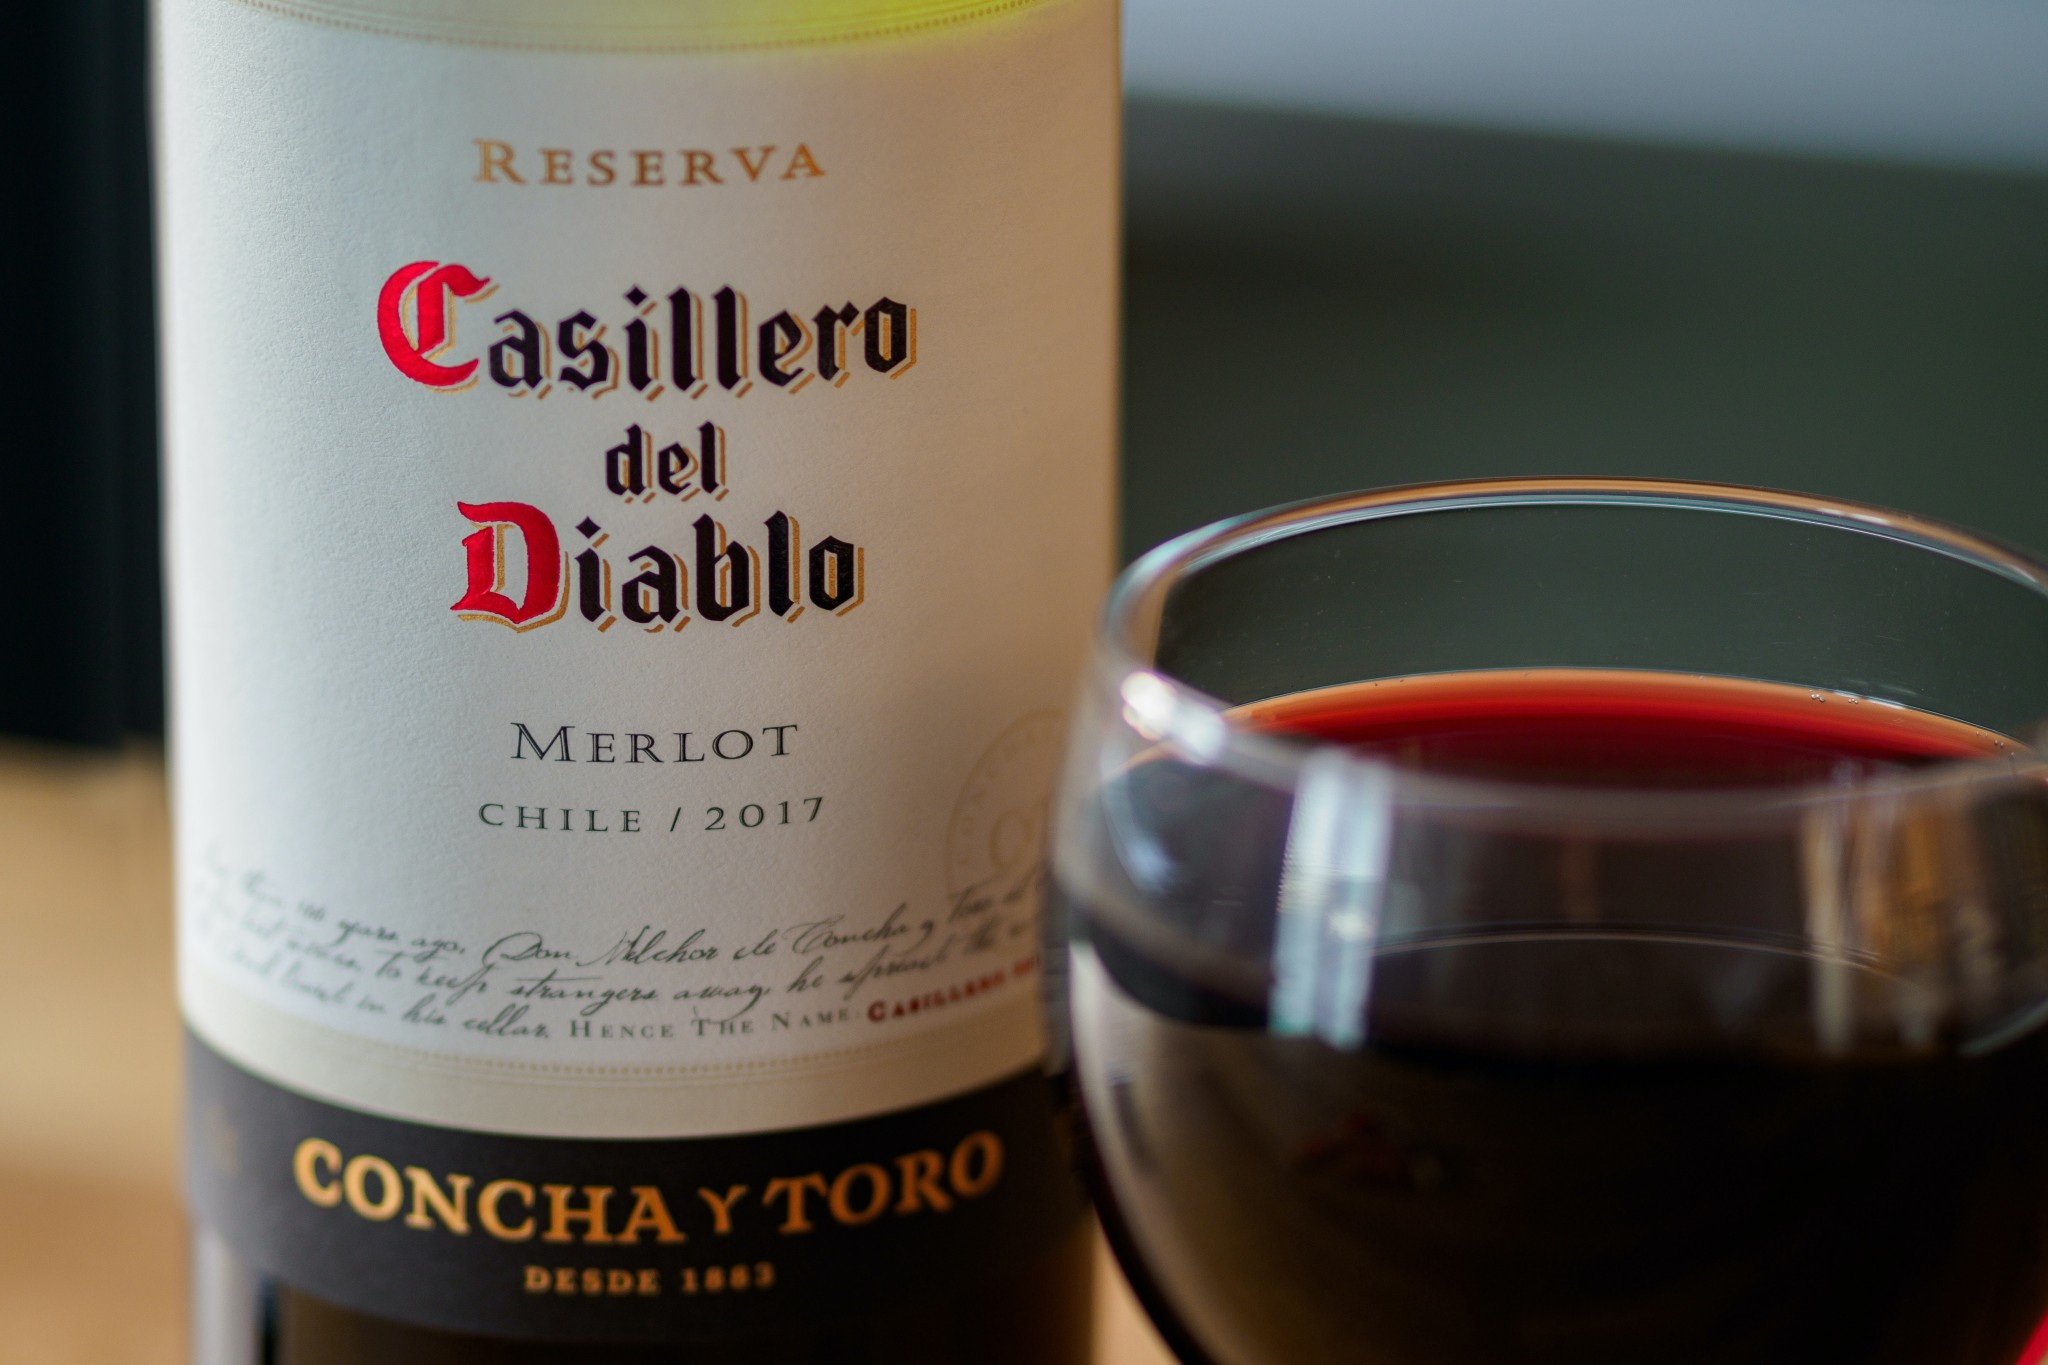 Concha y Toro Makes Full Q1 Sales Recoveries in China And South Korea